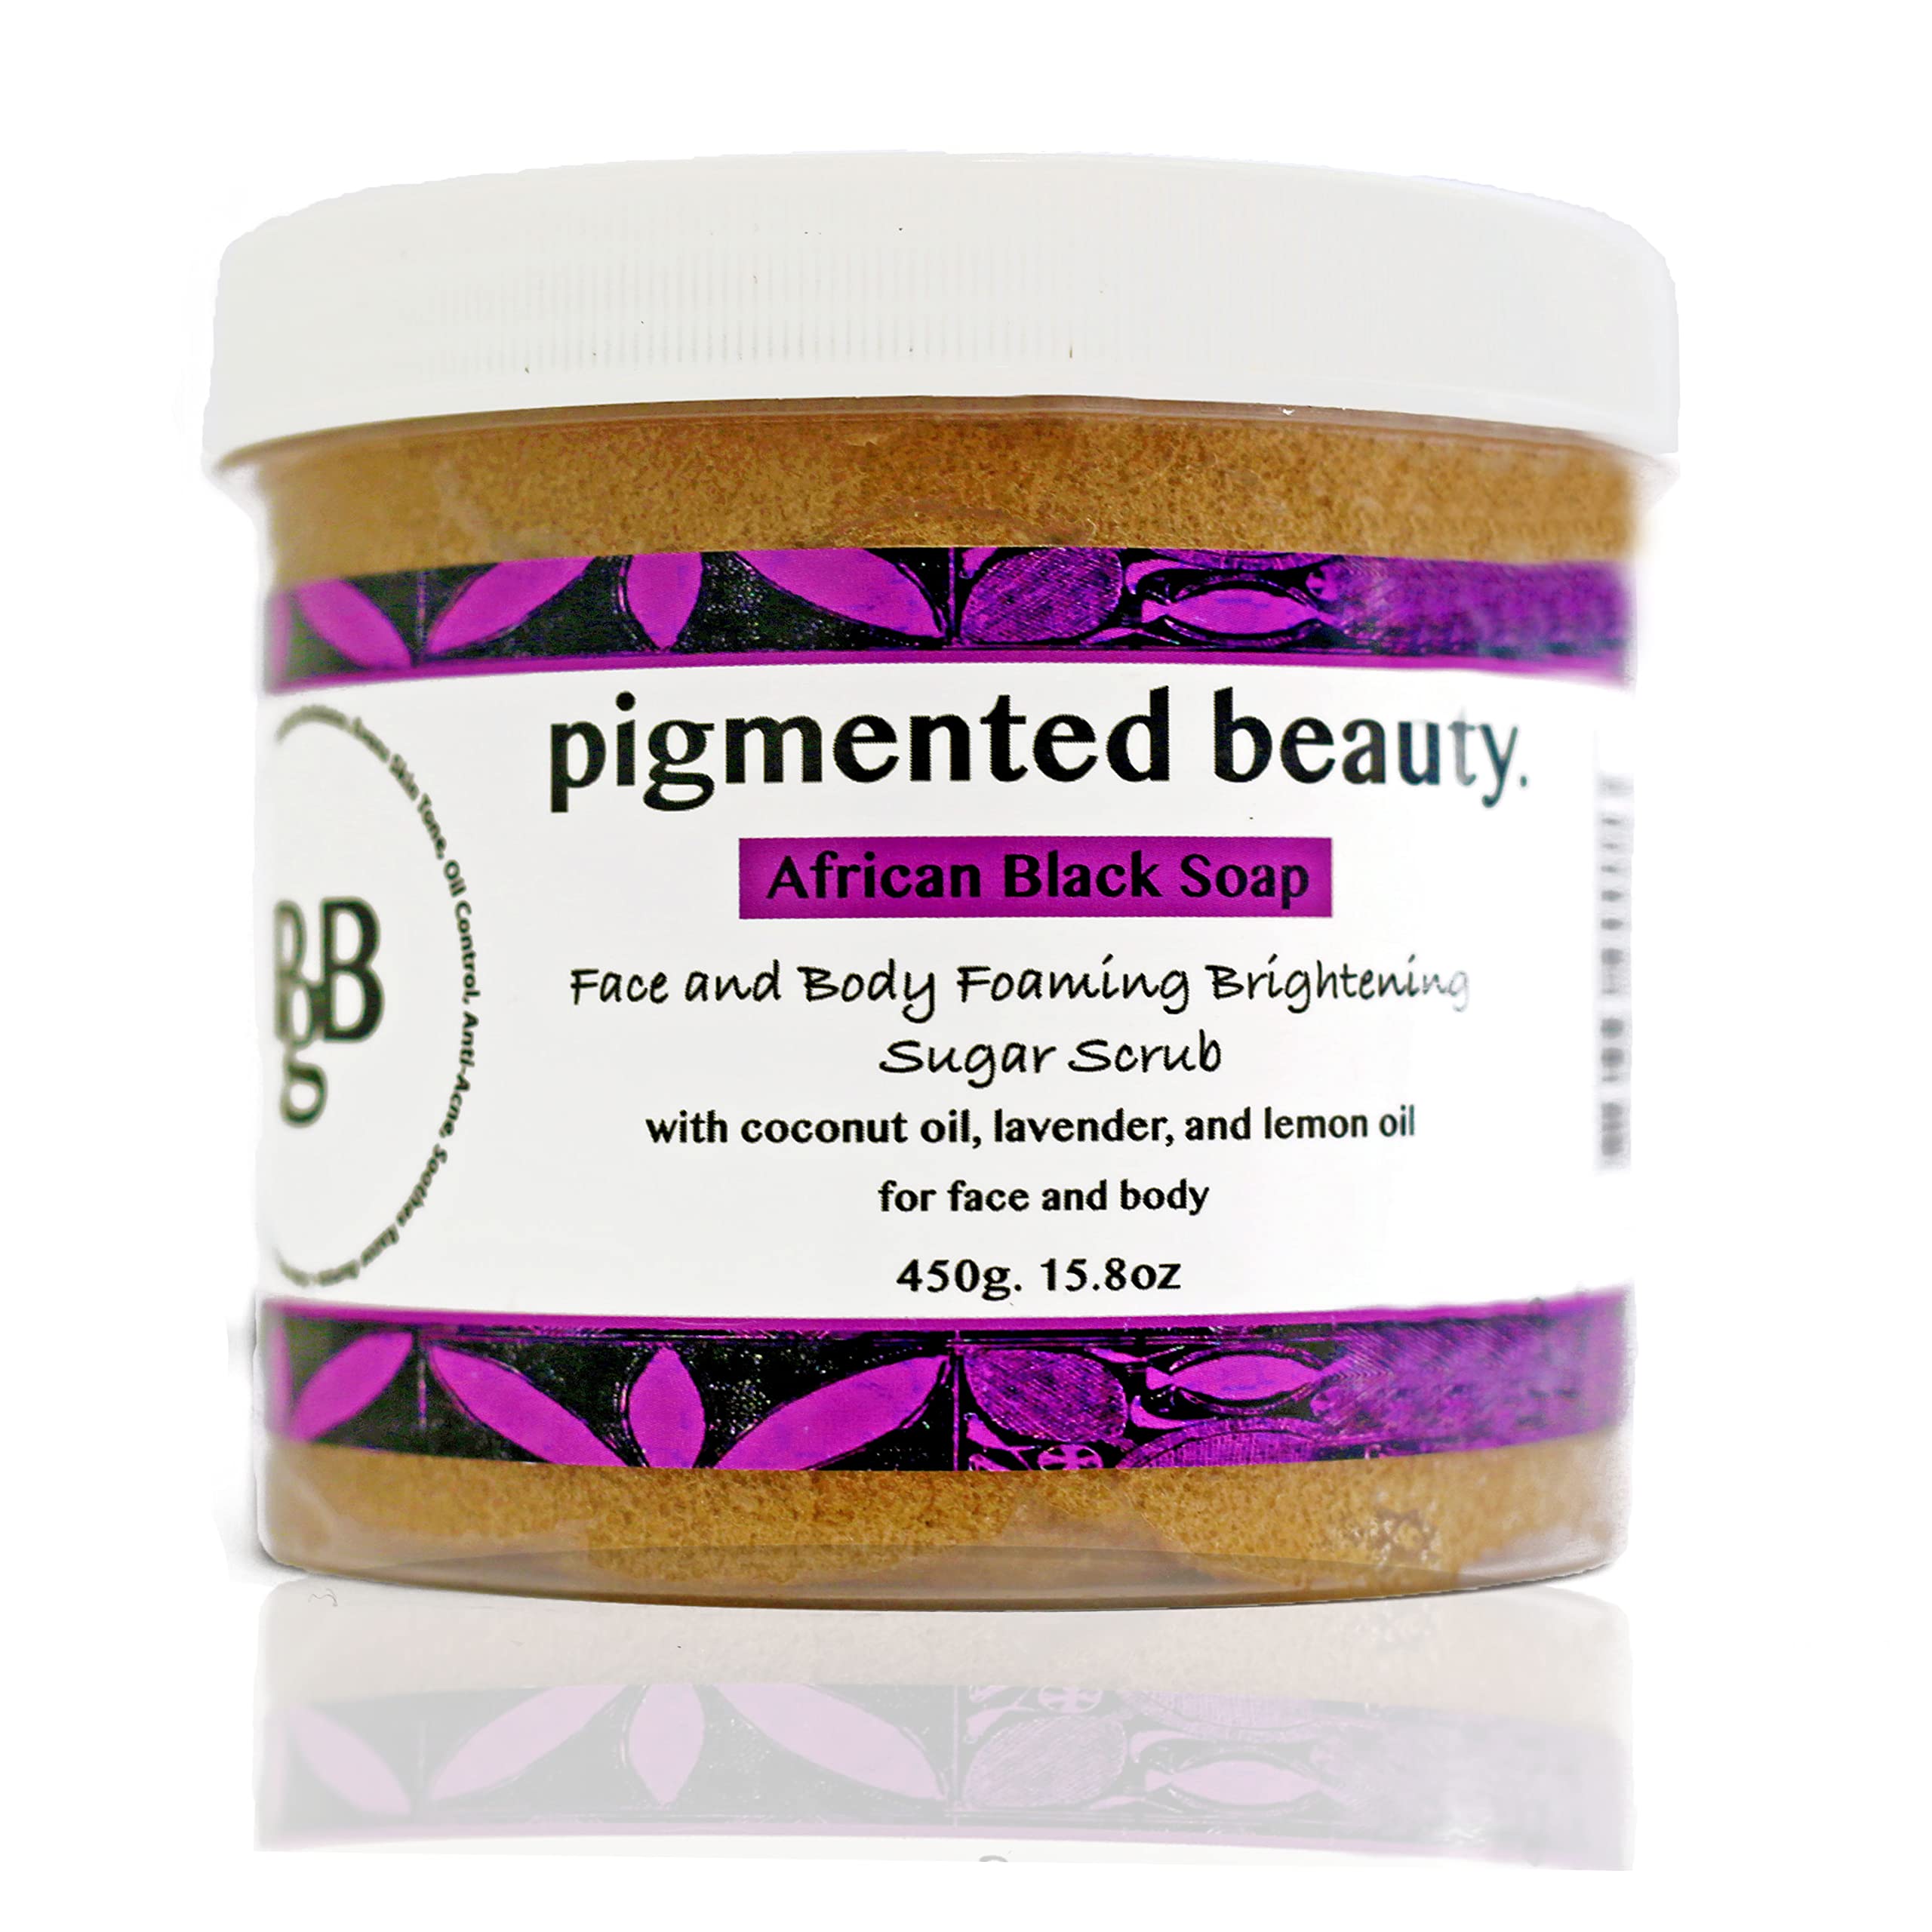 Pigmented Beauty African Black Soap 16.9oz - Hydrating and Even Tone Wash with Honey + Cleansing and Beautifying Sugar Scrub Combo with Lavender and Lemon Oil for All Skin Types…